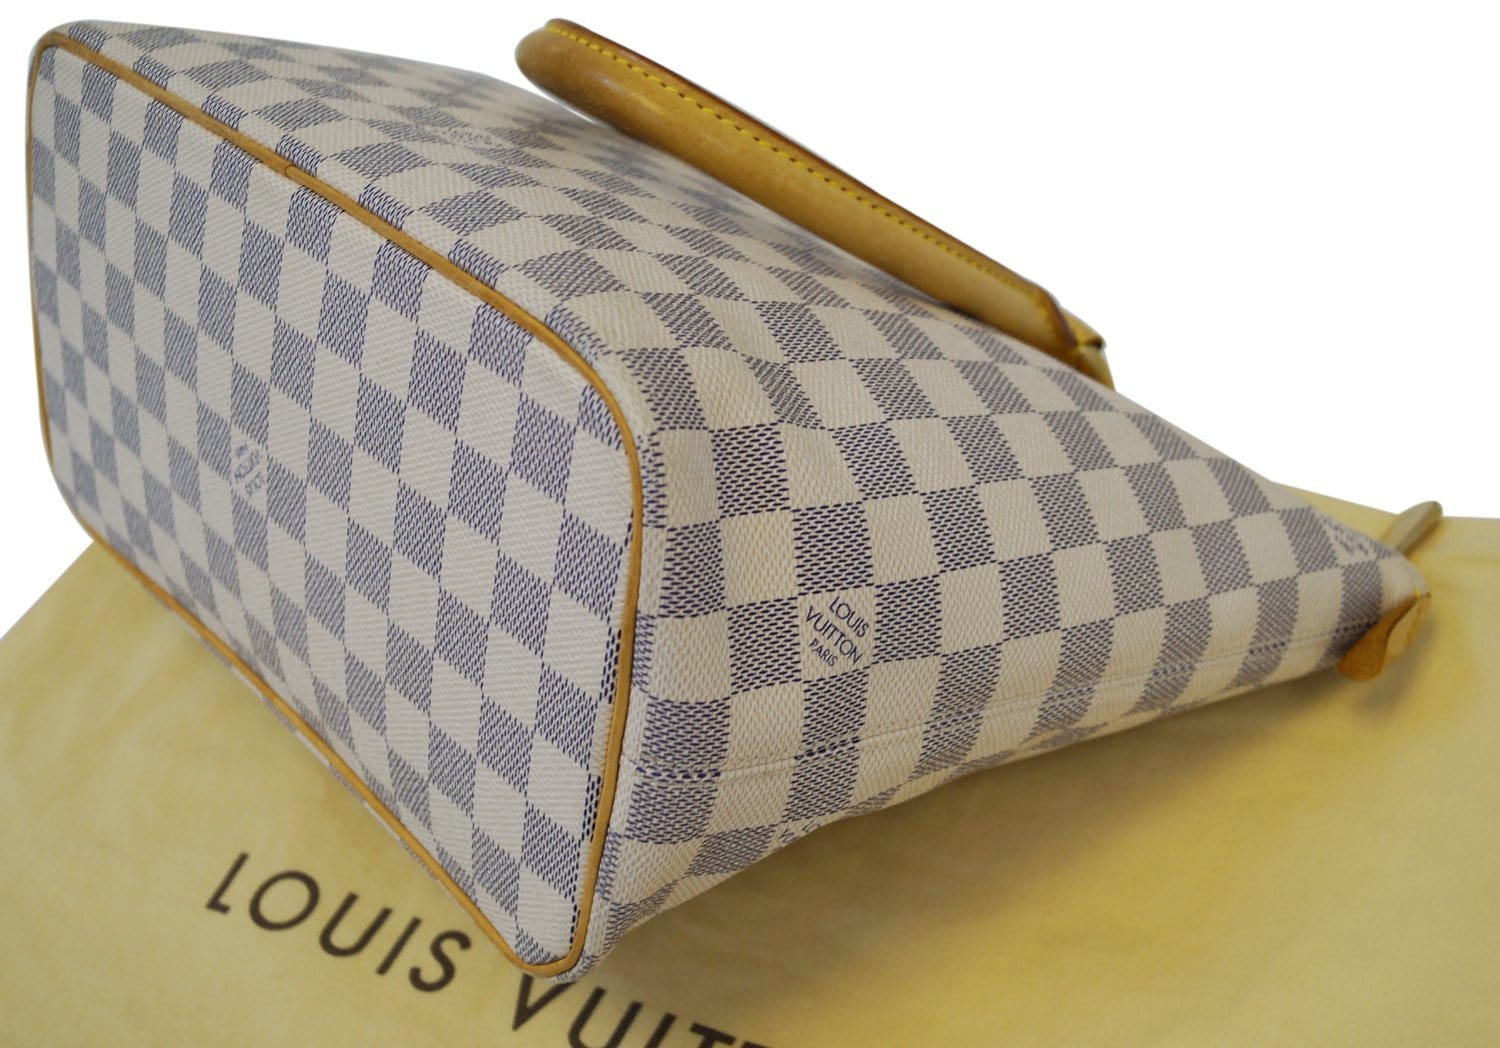 Shop for Louis Vuitton Damier Azur Canvas Leather Saleya PM Bag - Shipped  from USA